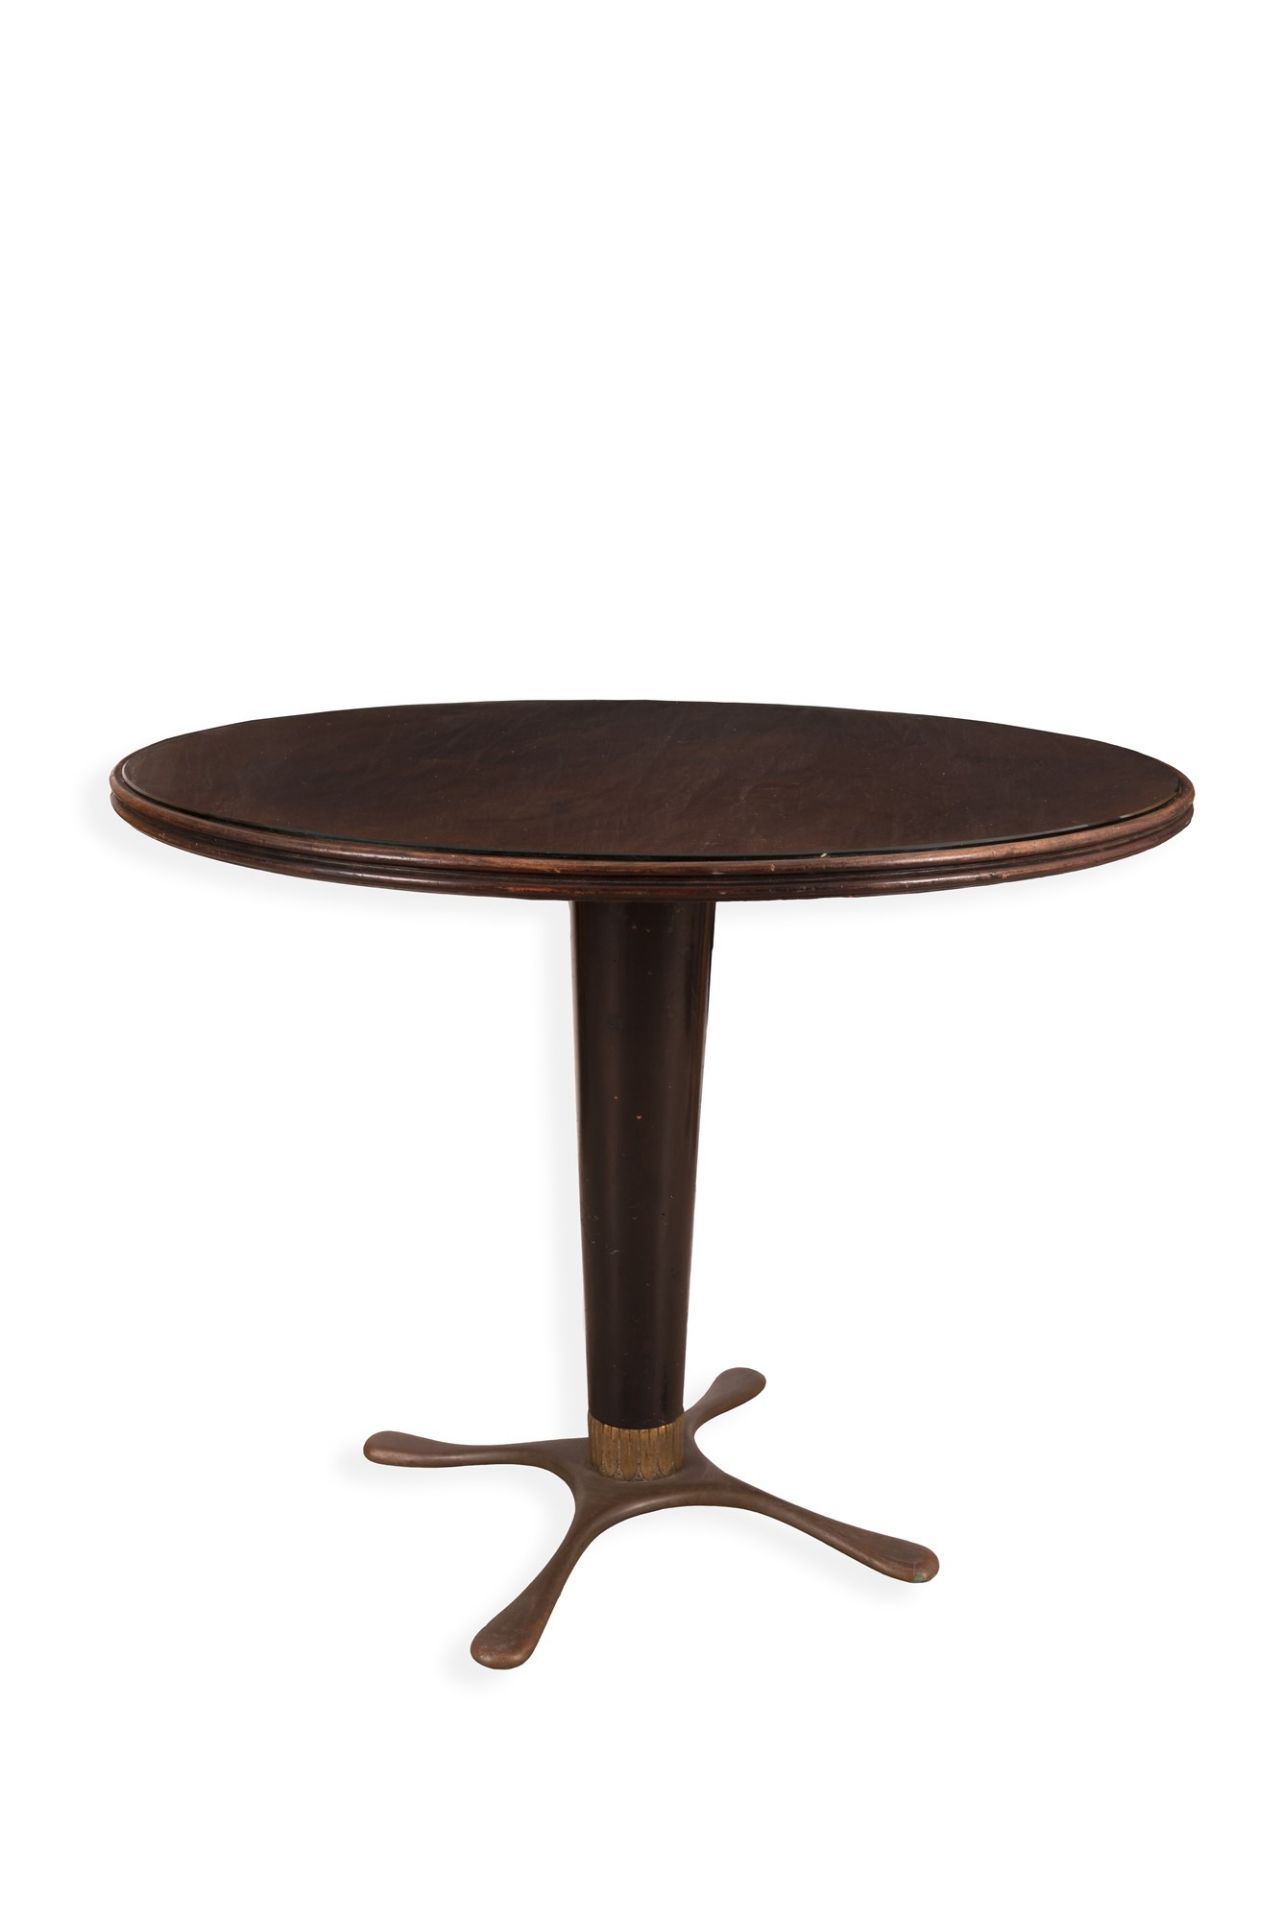 English Manufacture, 19th Century English Manufacture Round rosewood coffee table - Image 3 of 3